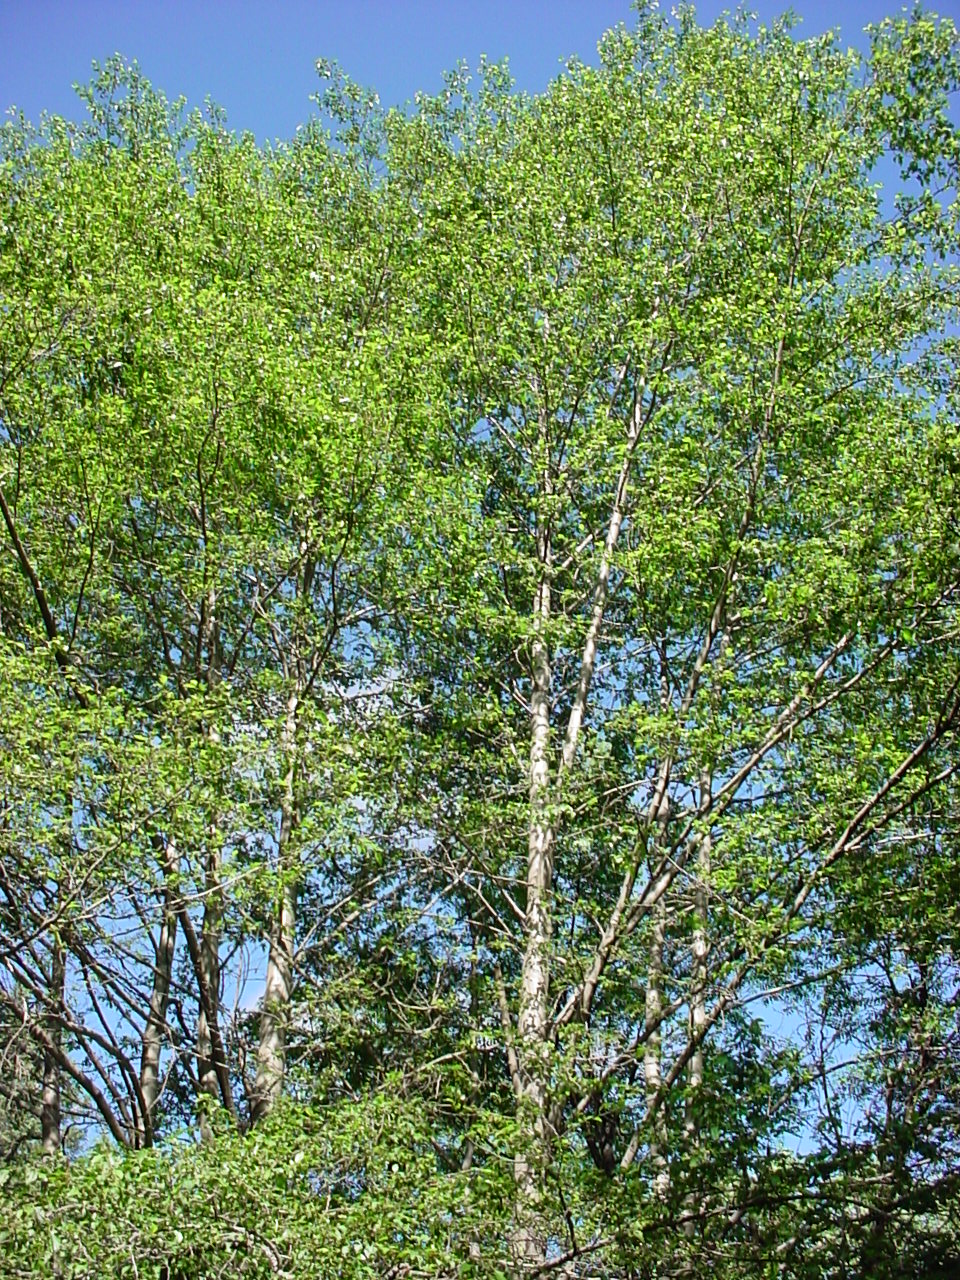 Full view  of treetop showing full, leafy canopy